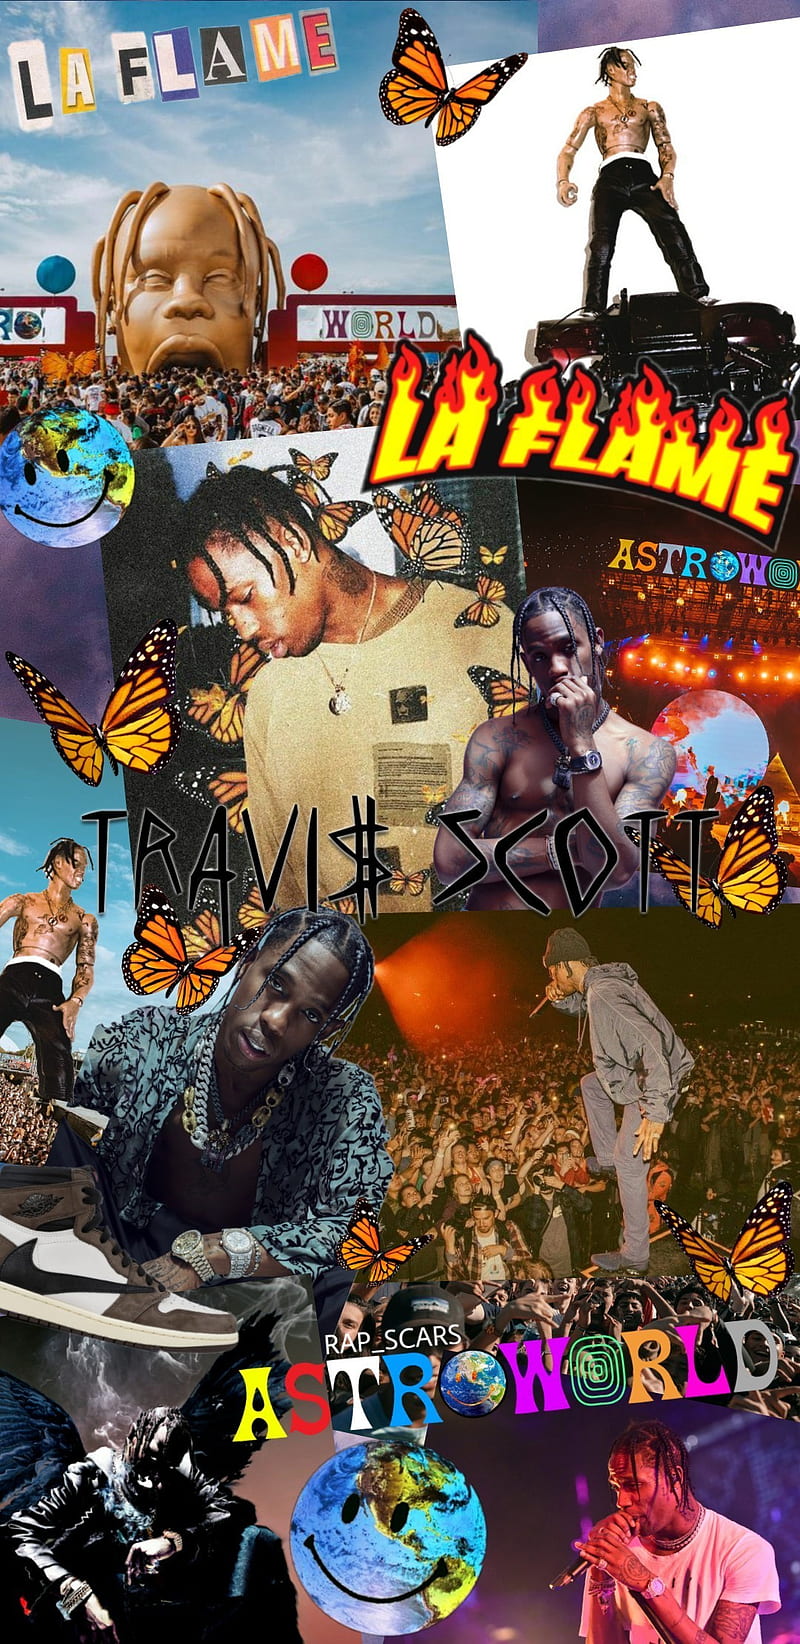 Travis Scott , astroworld, astroworld fest, birds in the trap sing, cactus jack, laflame, rodeo, sicko mode, travis scott, travis scott, HD phone wallpaper